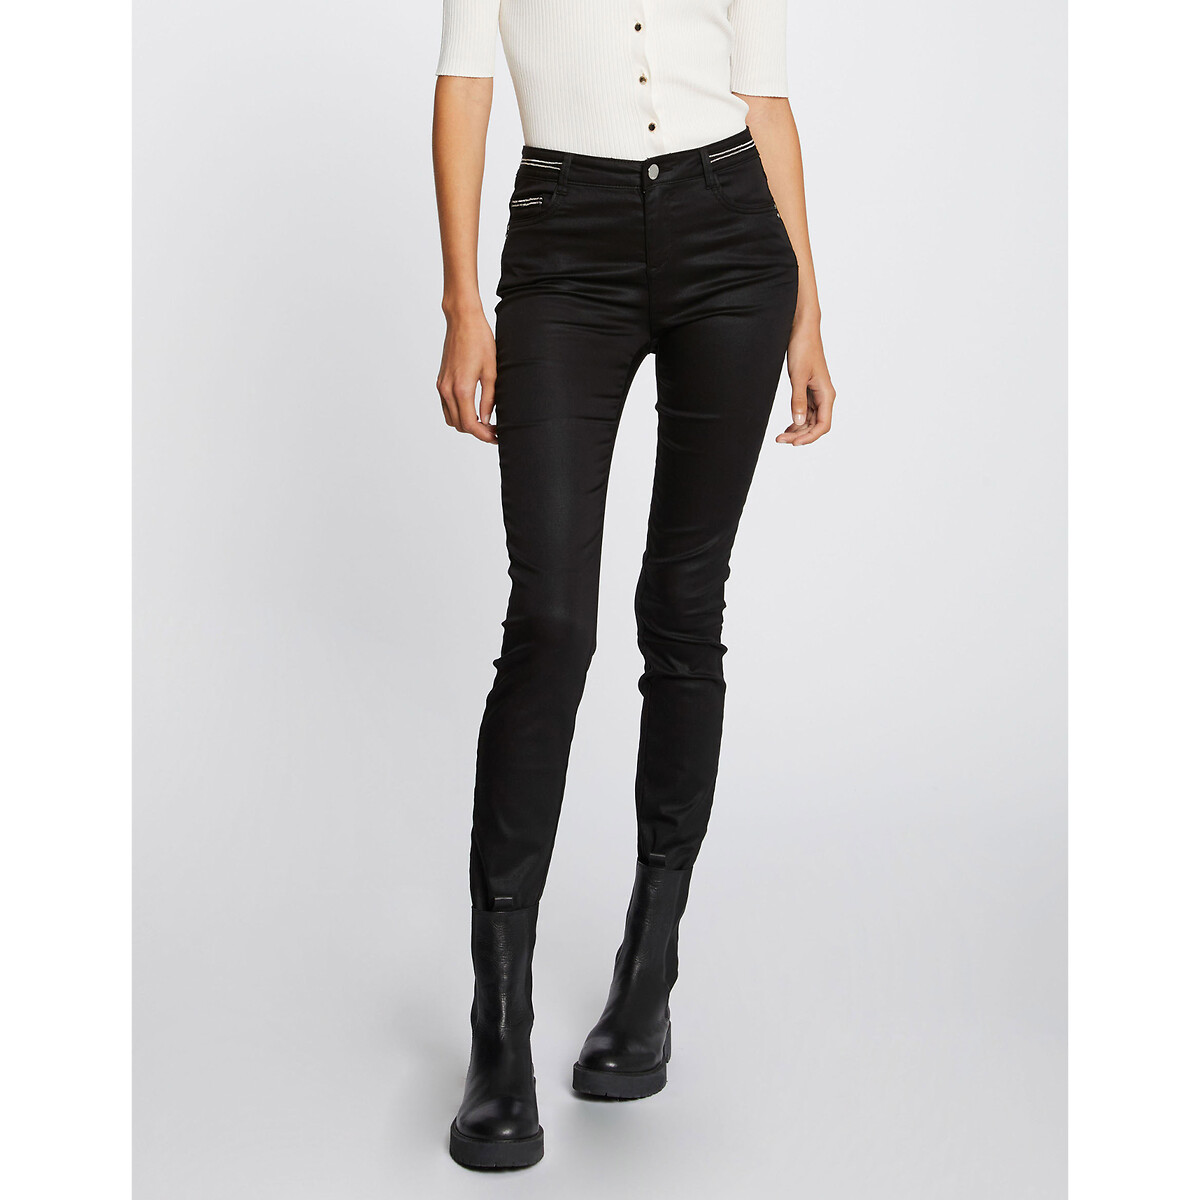 Cotton Mix Coated Trousers with High Waist in Slim Fit